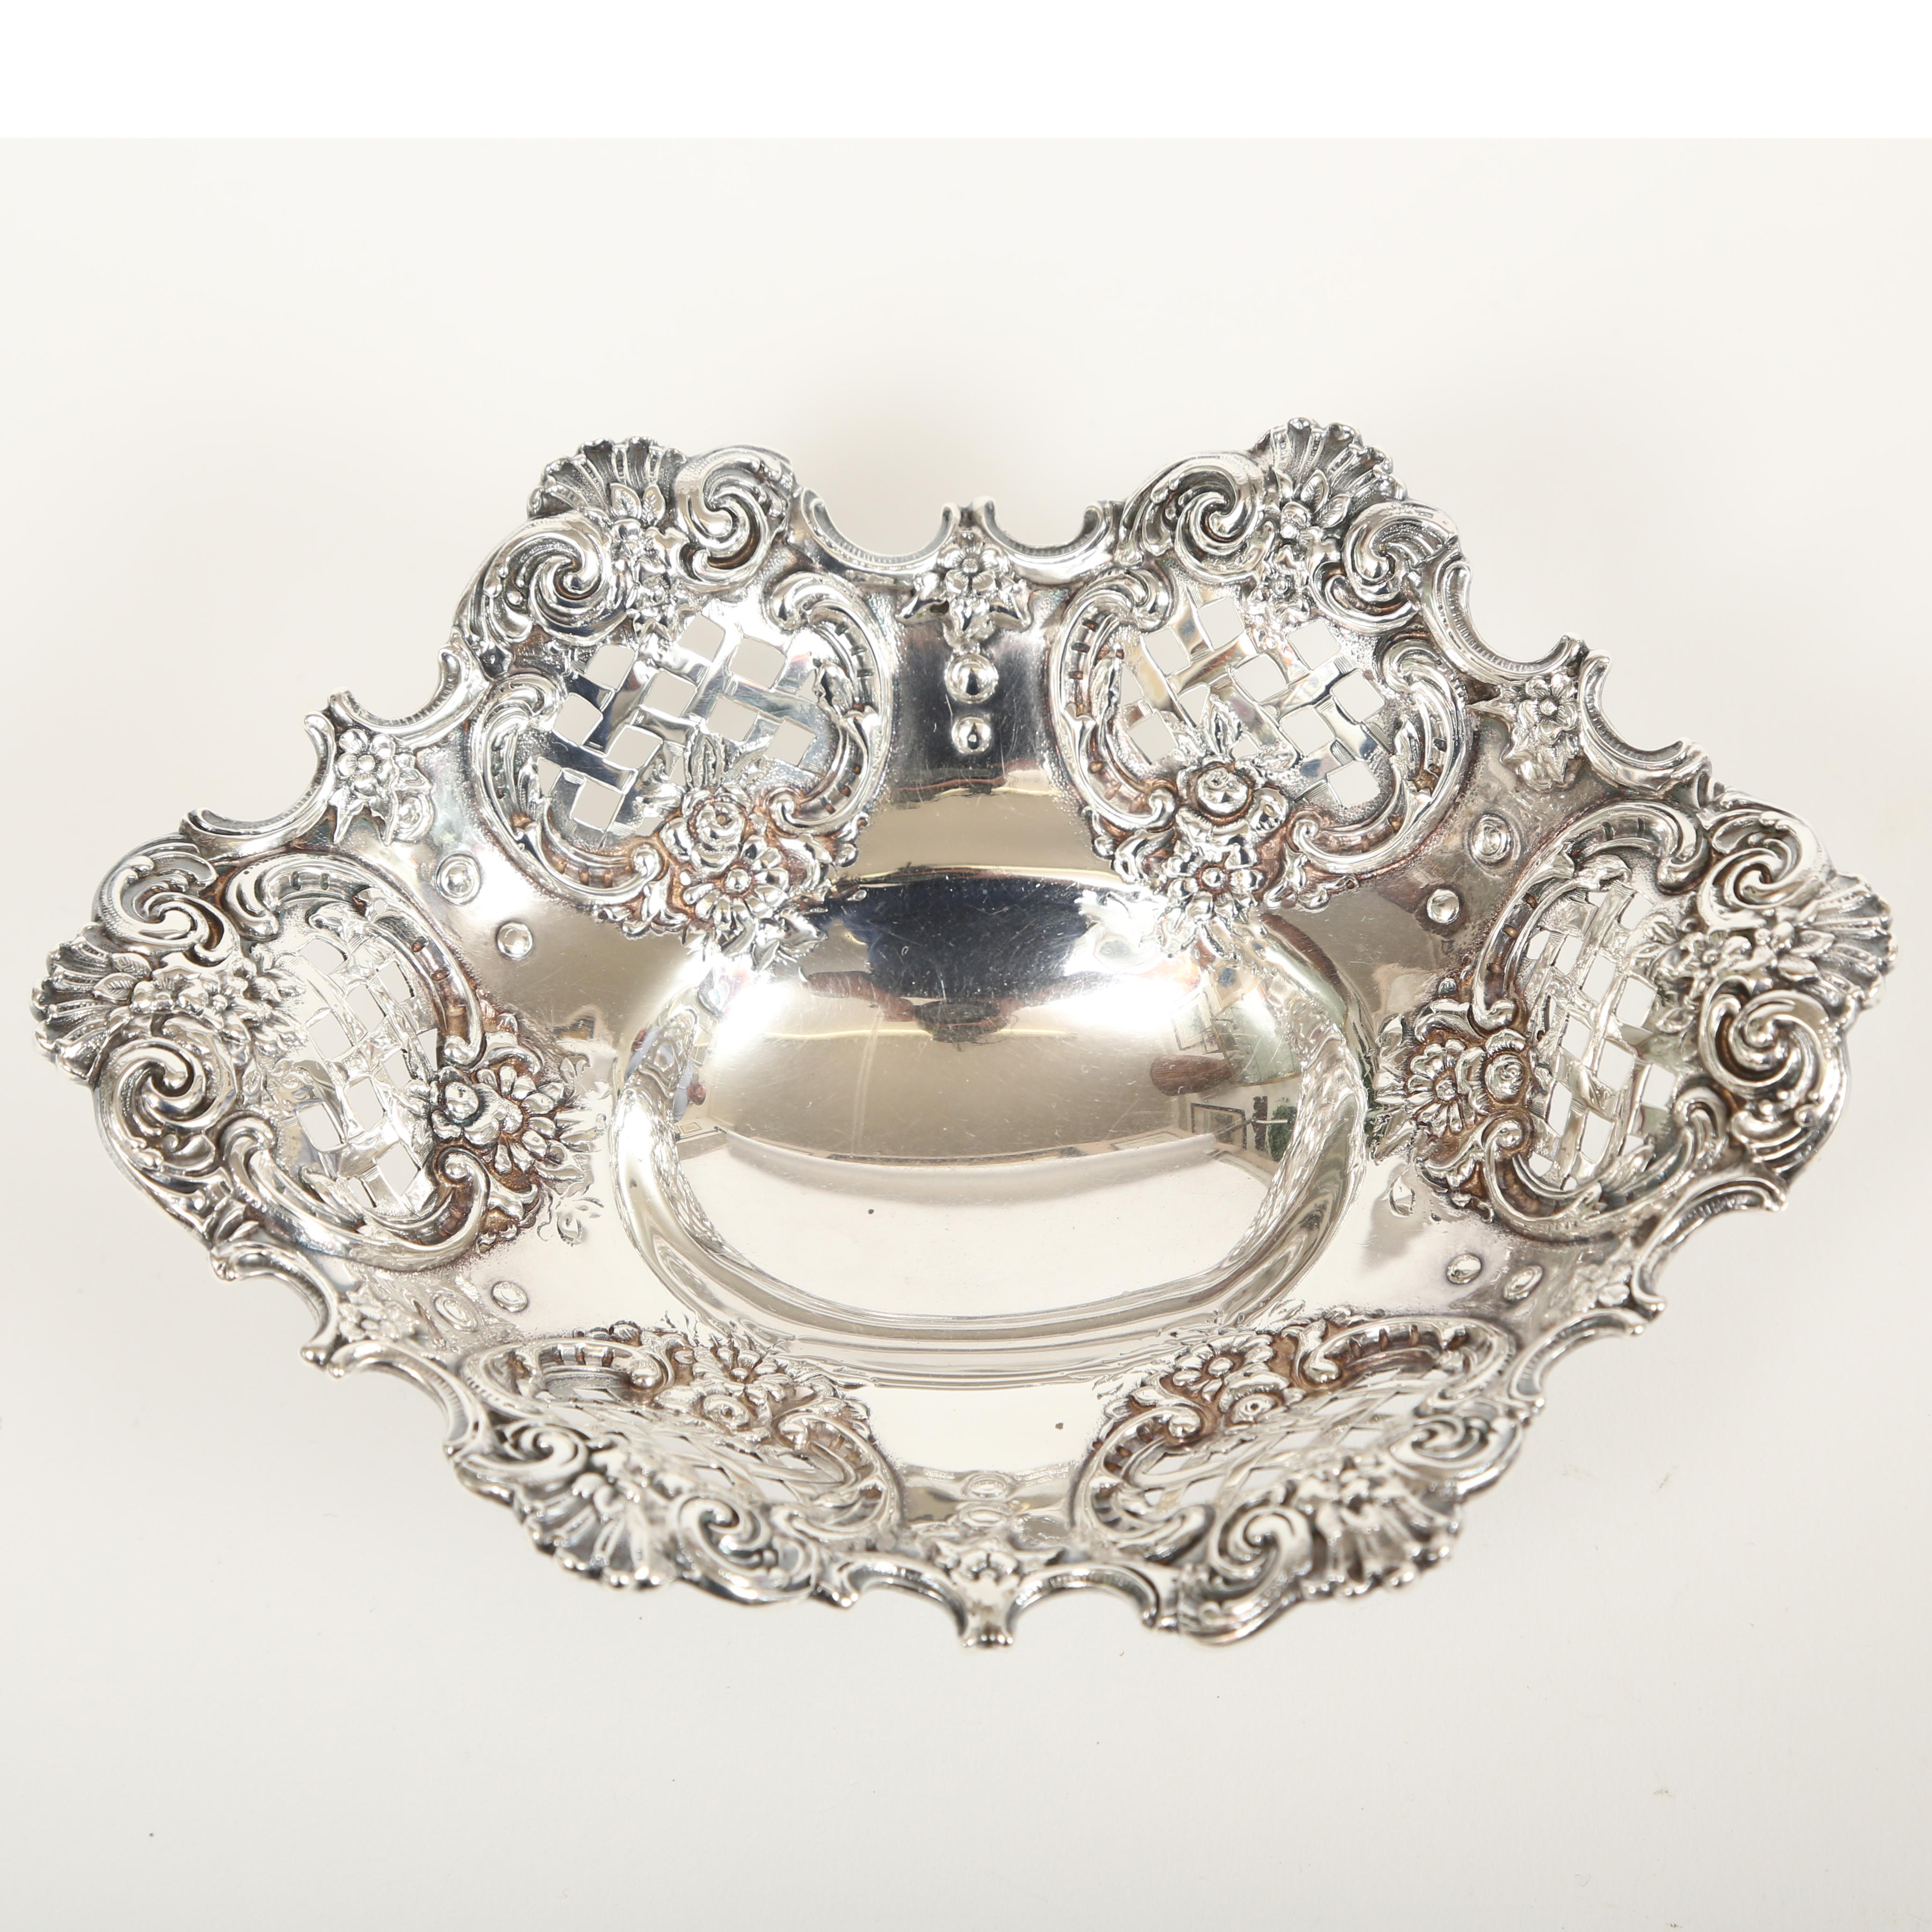 Tiffany sterling silver footed bowl. The work on the sterling silver is pierced, reticulated and repoussage. The latticed design is surrounded by flowers, 